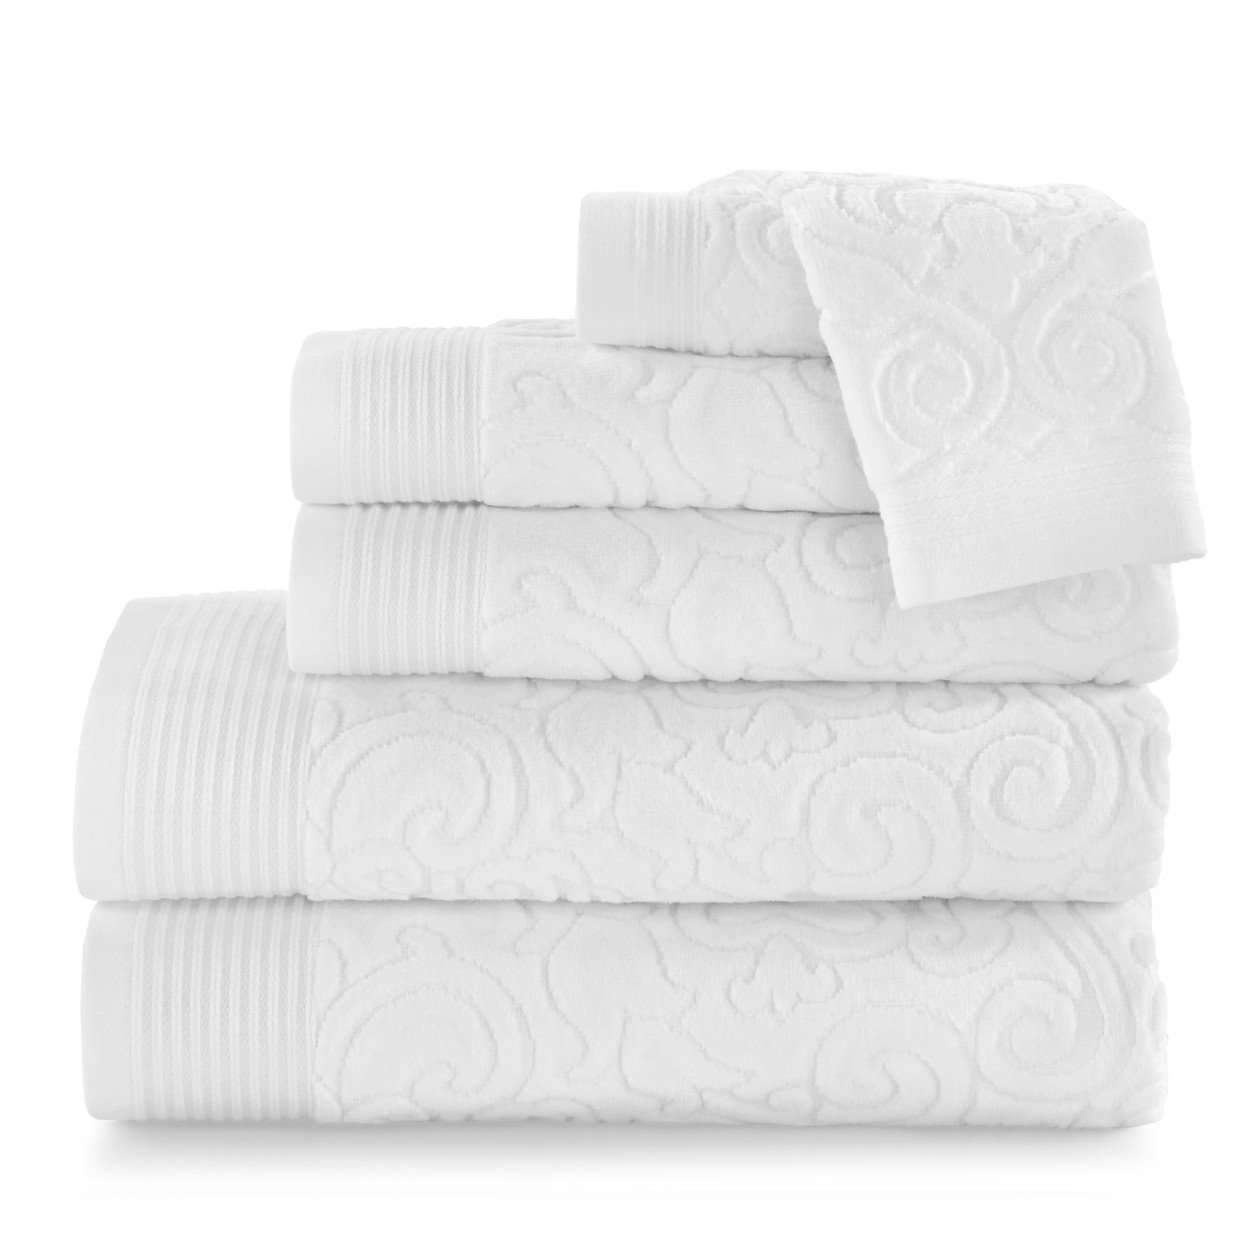 Towels Park Avenue Bath Collection by Peacock Alley Wash Cloth 12x12 / White Peacock Alley